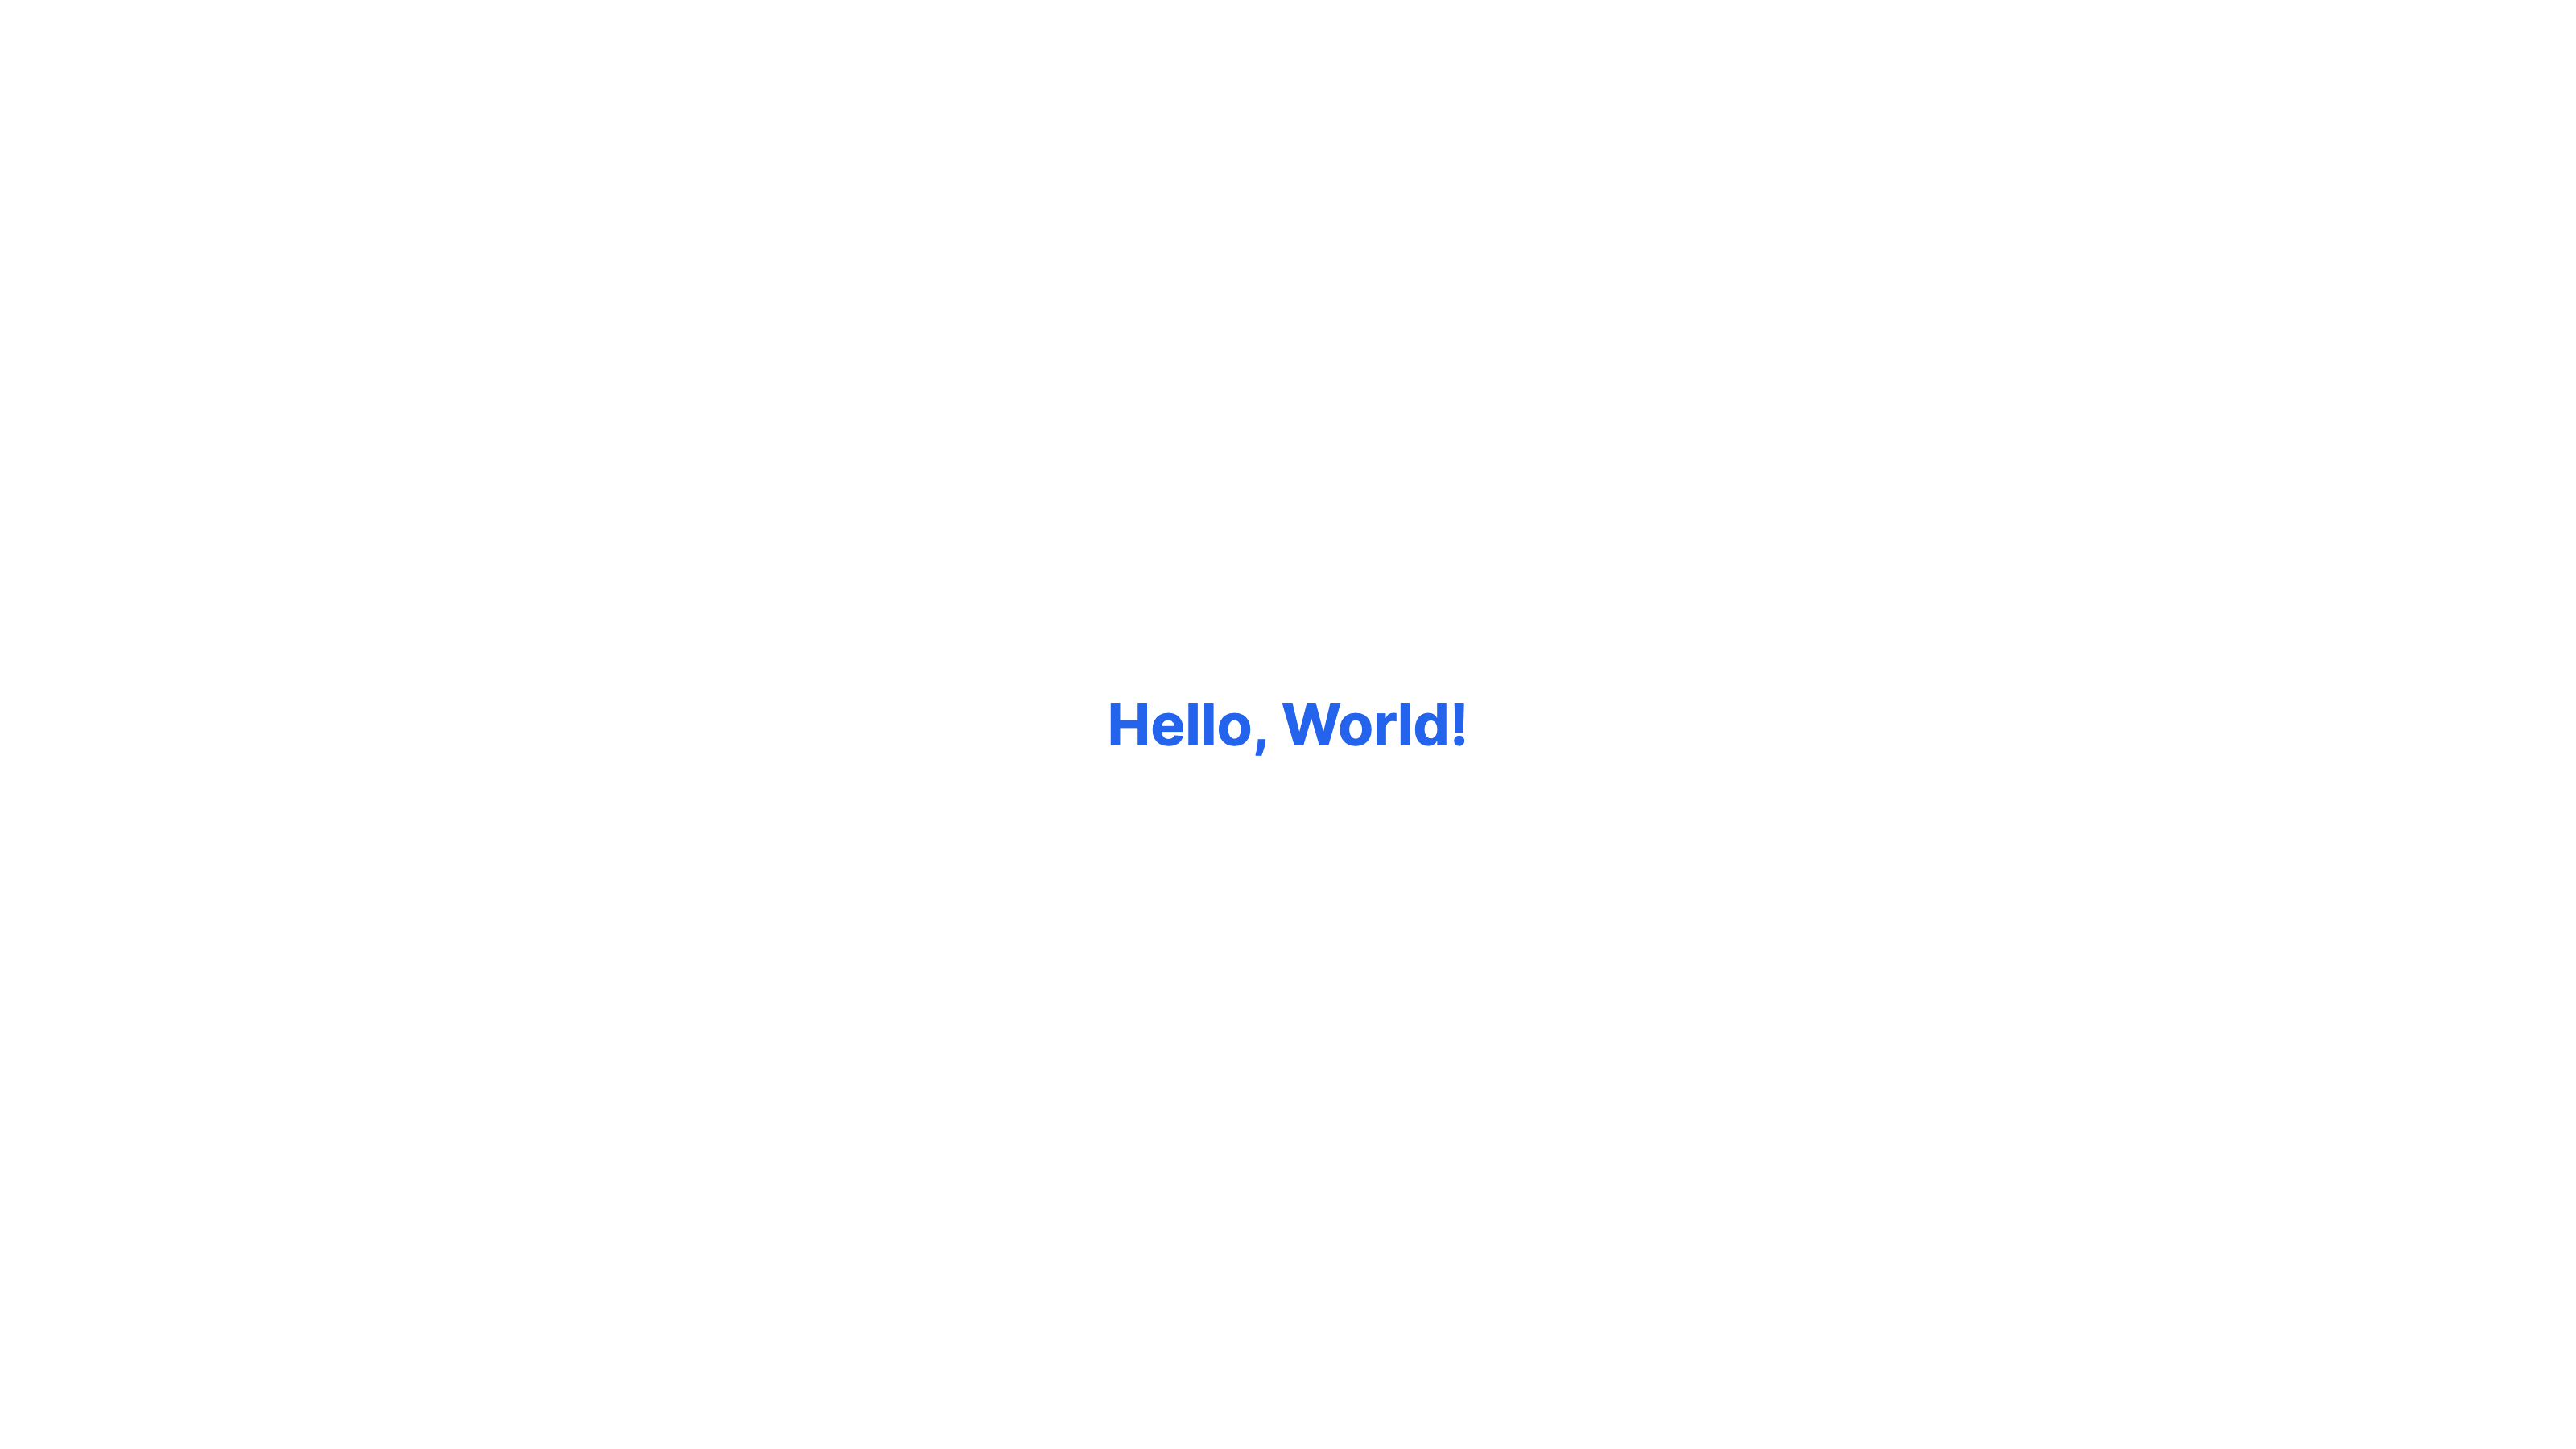 Our "Hello, World!" Next.js web app styled with Tailwind CSS